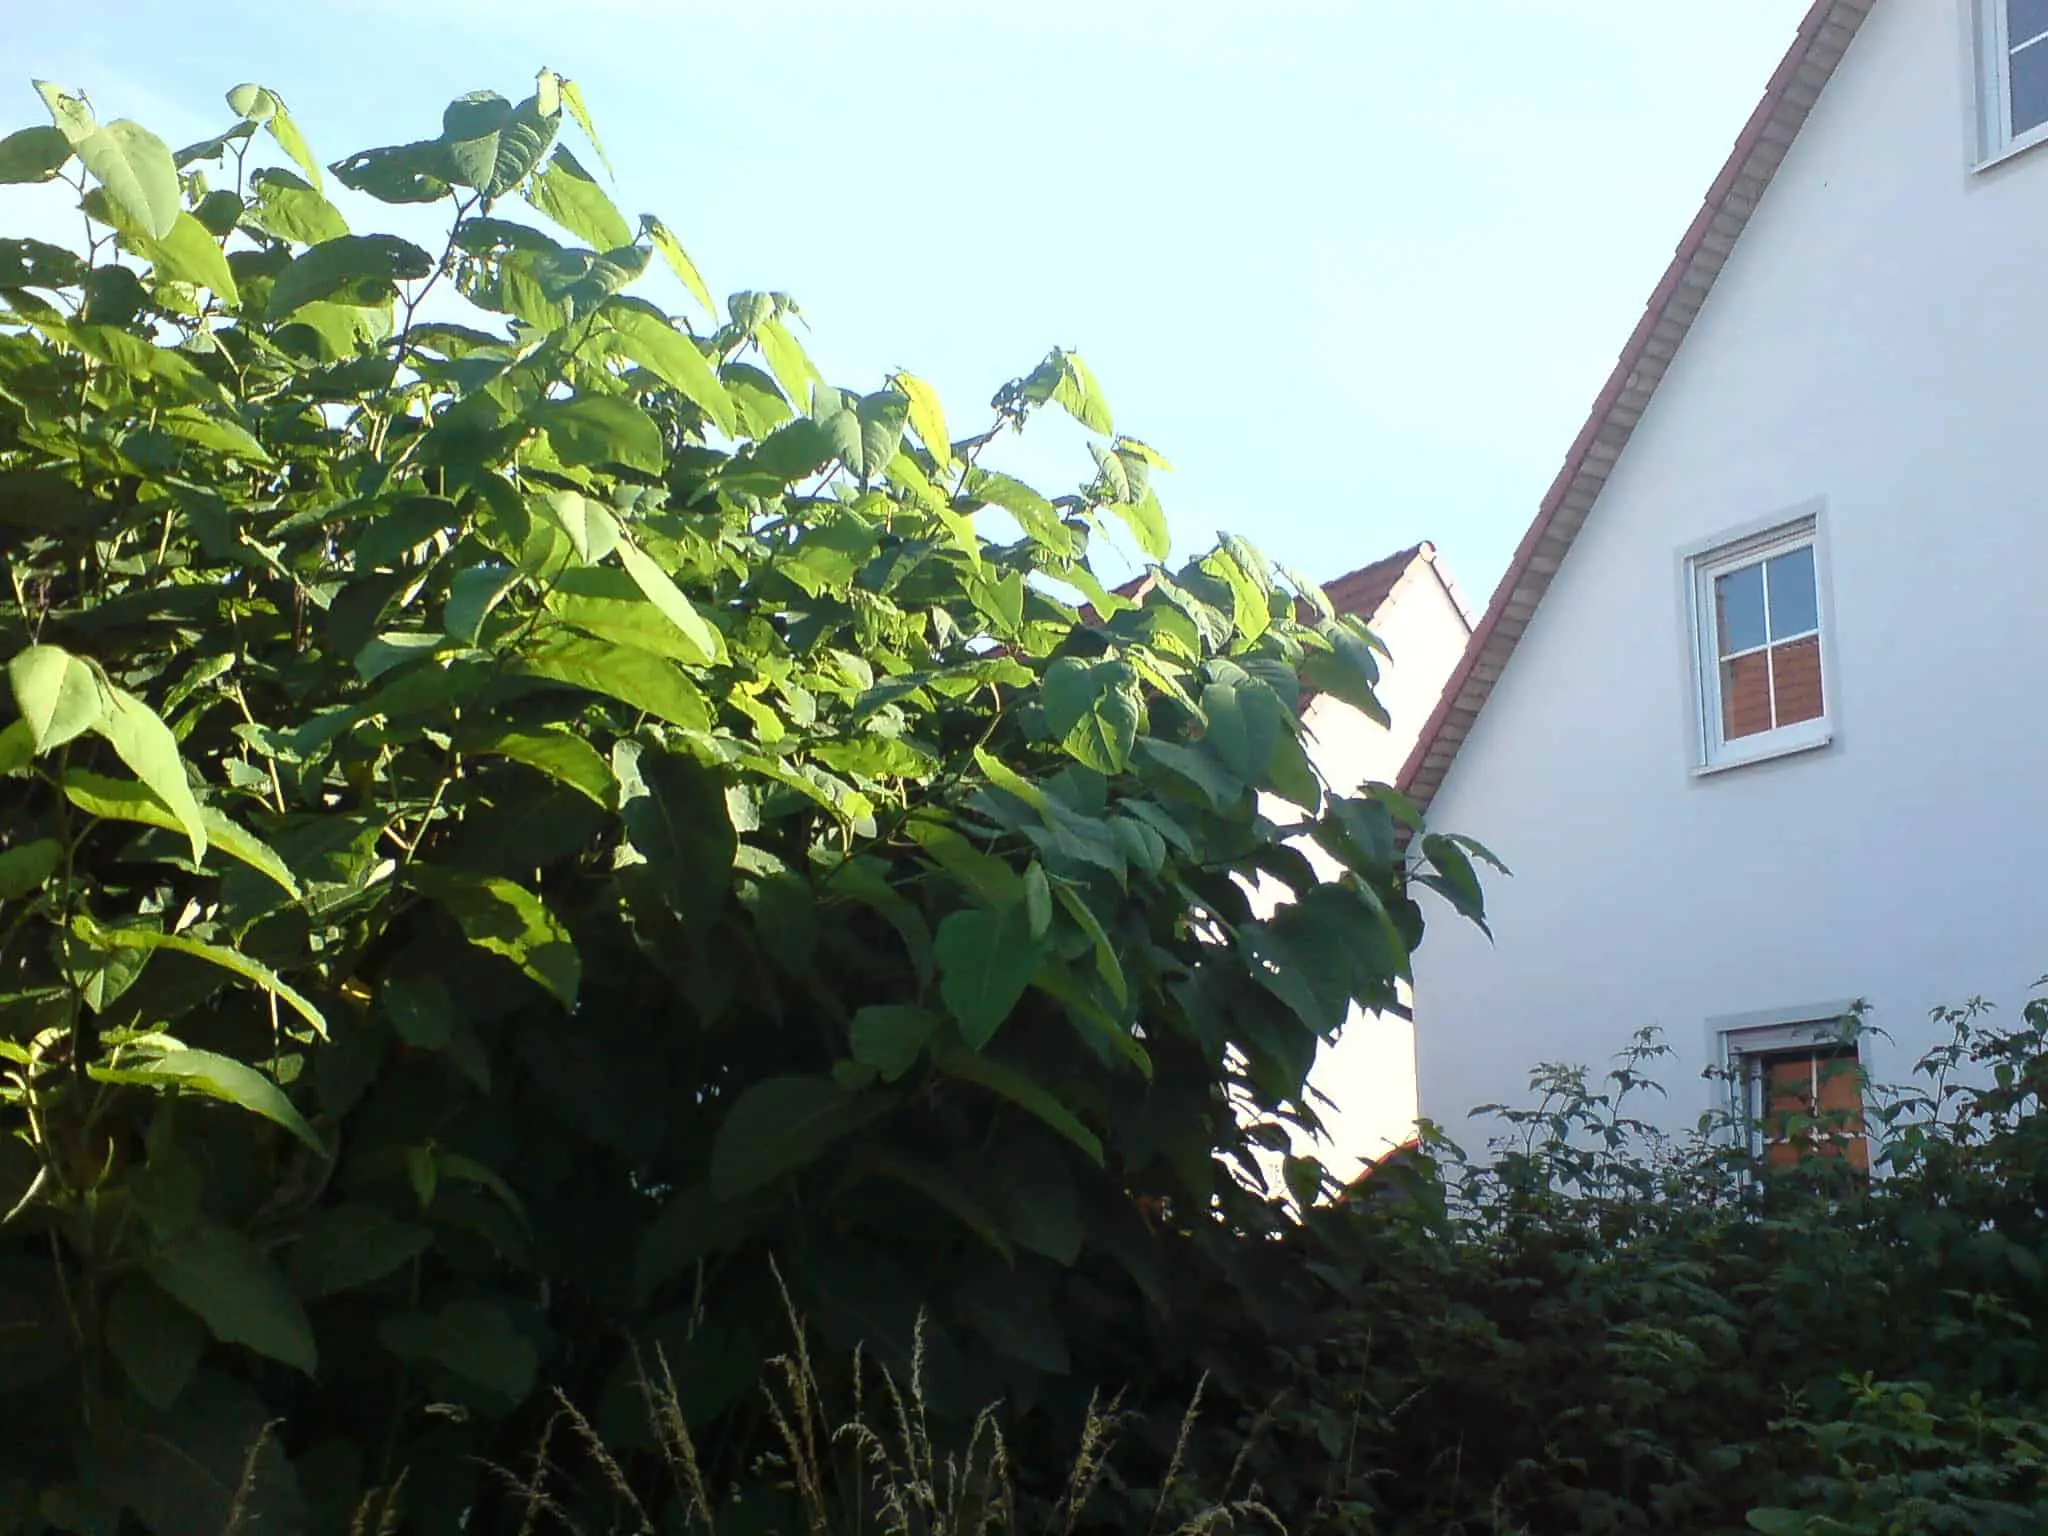 Bought a house with Japanese knotweed encroaching it can lead to huge problems if not dealt with sooner rather than later